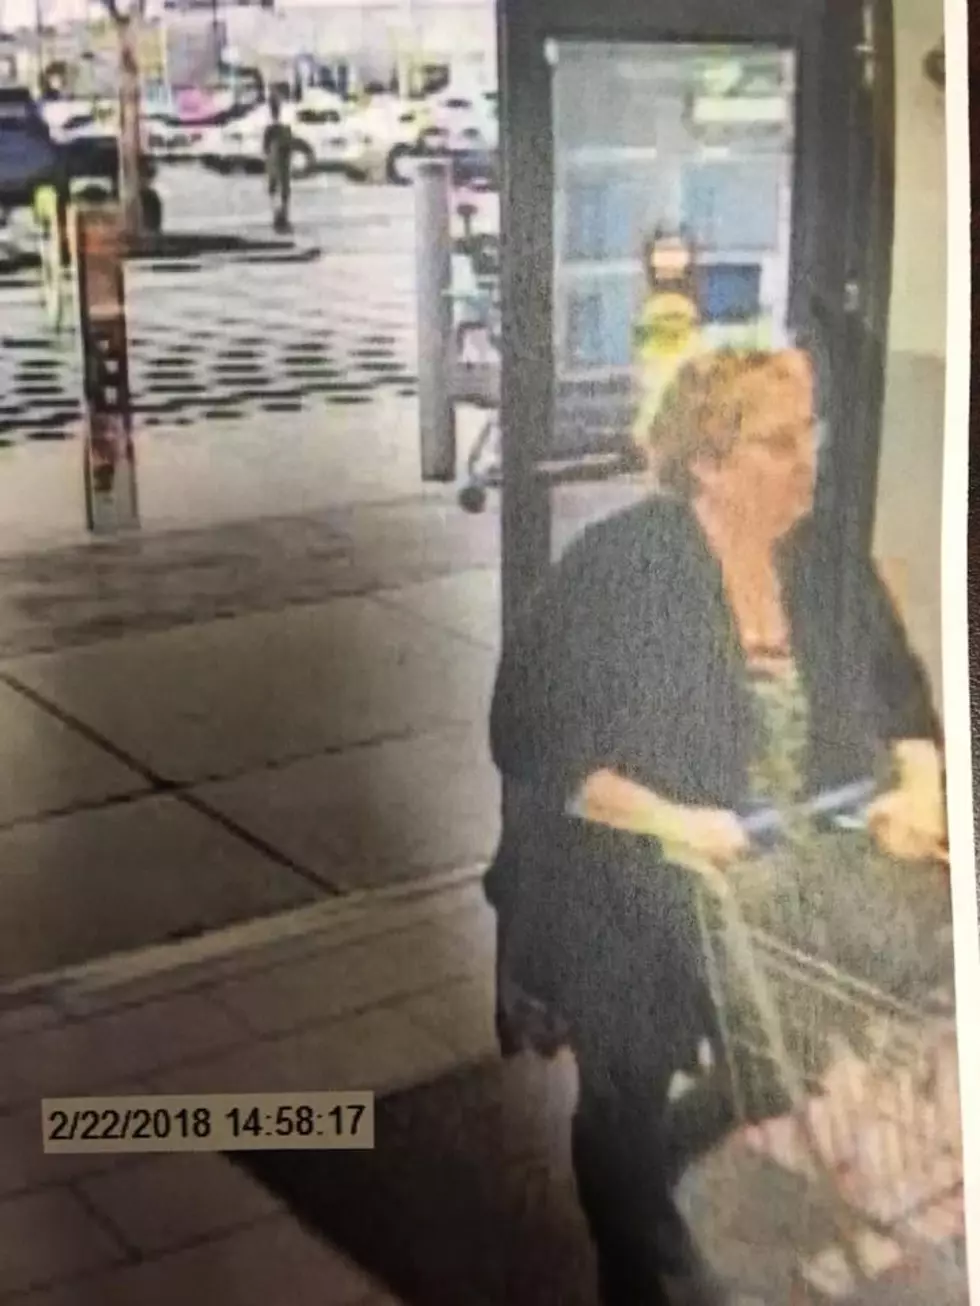 Stafford Police need your help identifying this woman